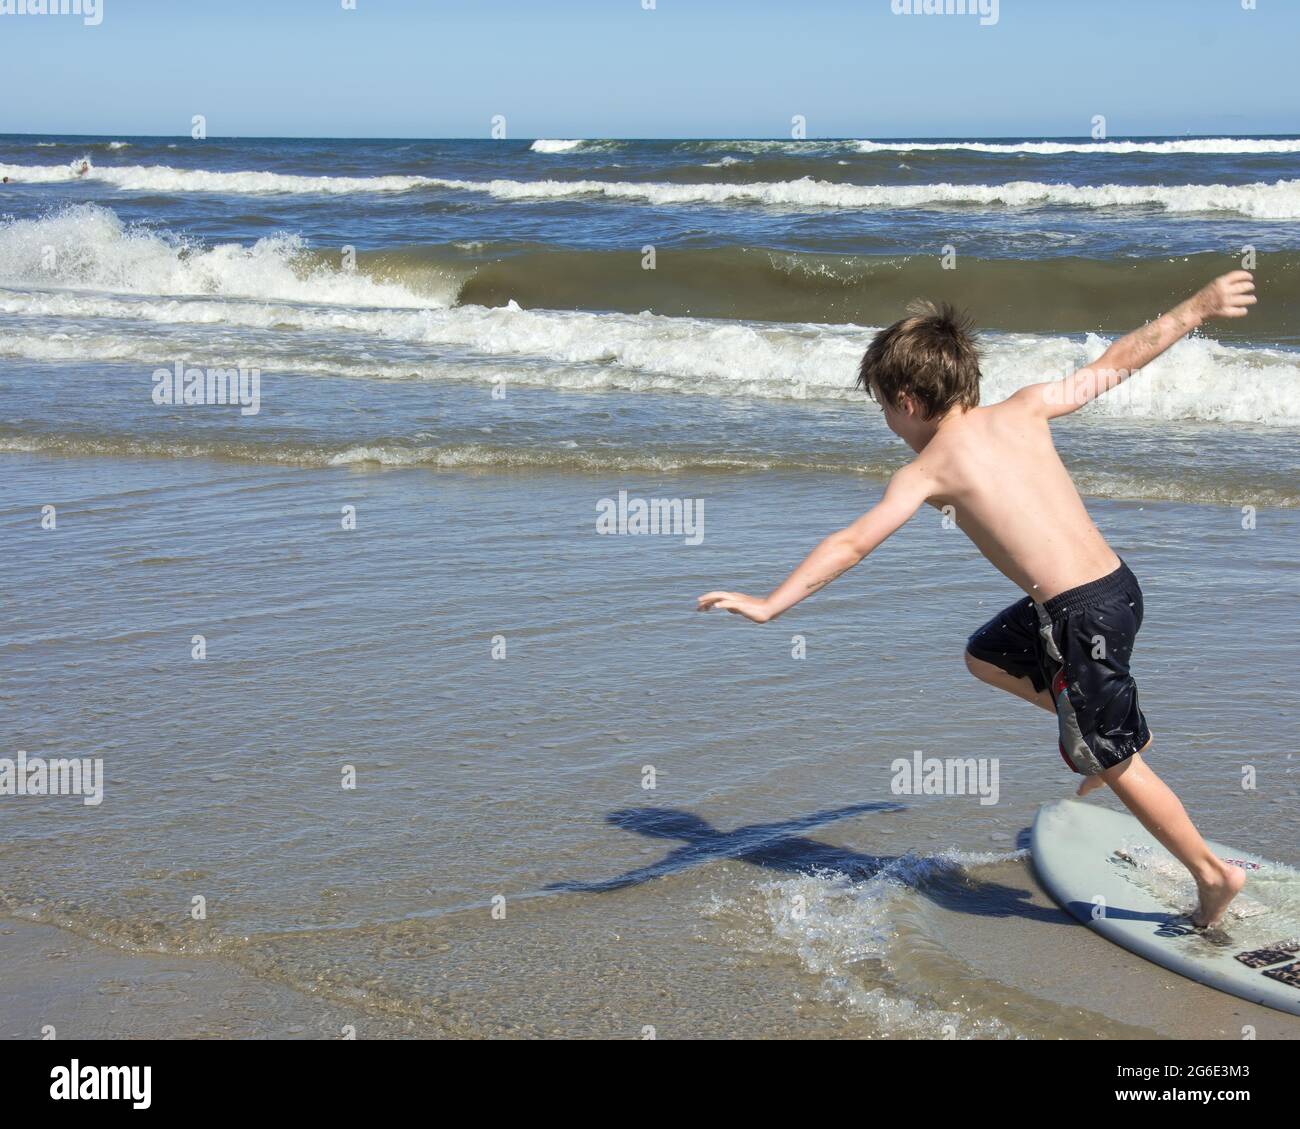 Young boy on a boogie board balancing himself with his arms, at the edge of the ocean during summer. Stock Photo